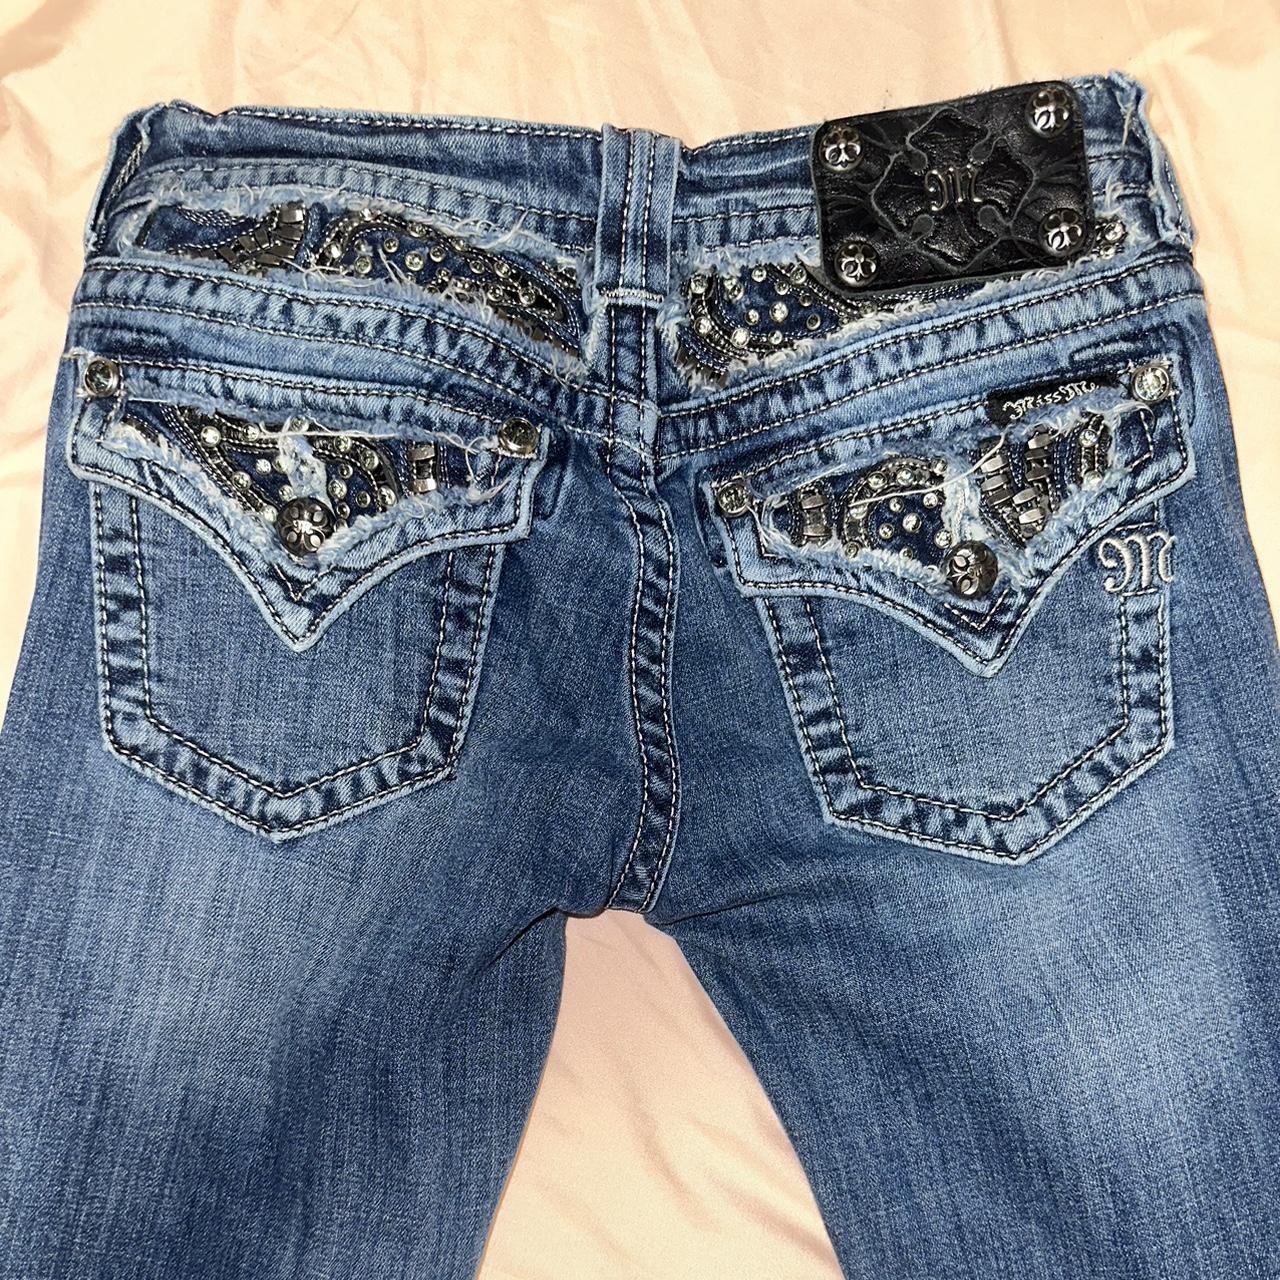 Skinny miss me jeans Preloved, can’t fit anymore... - Depop